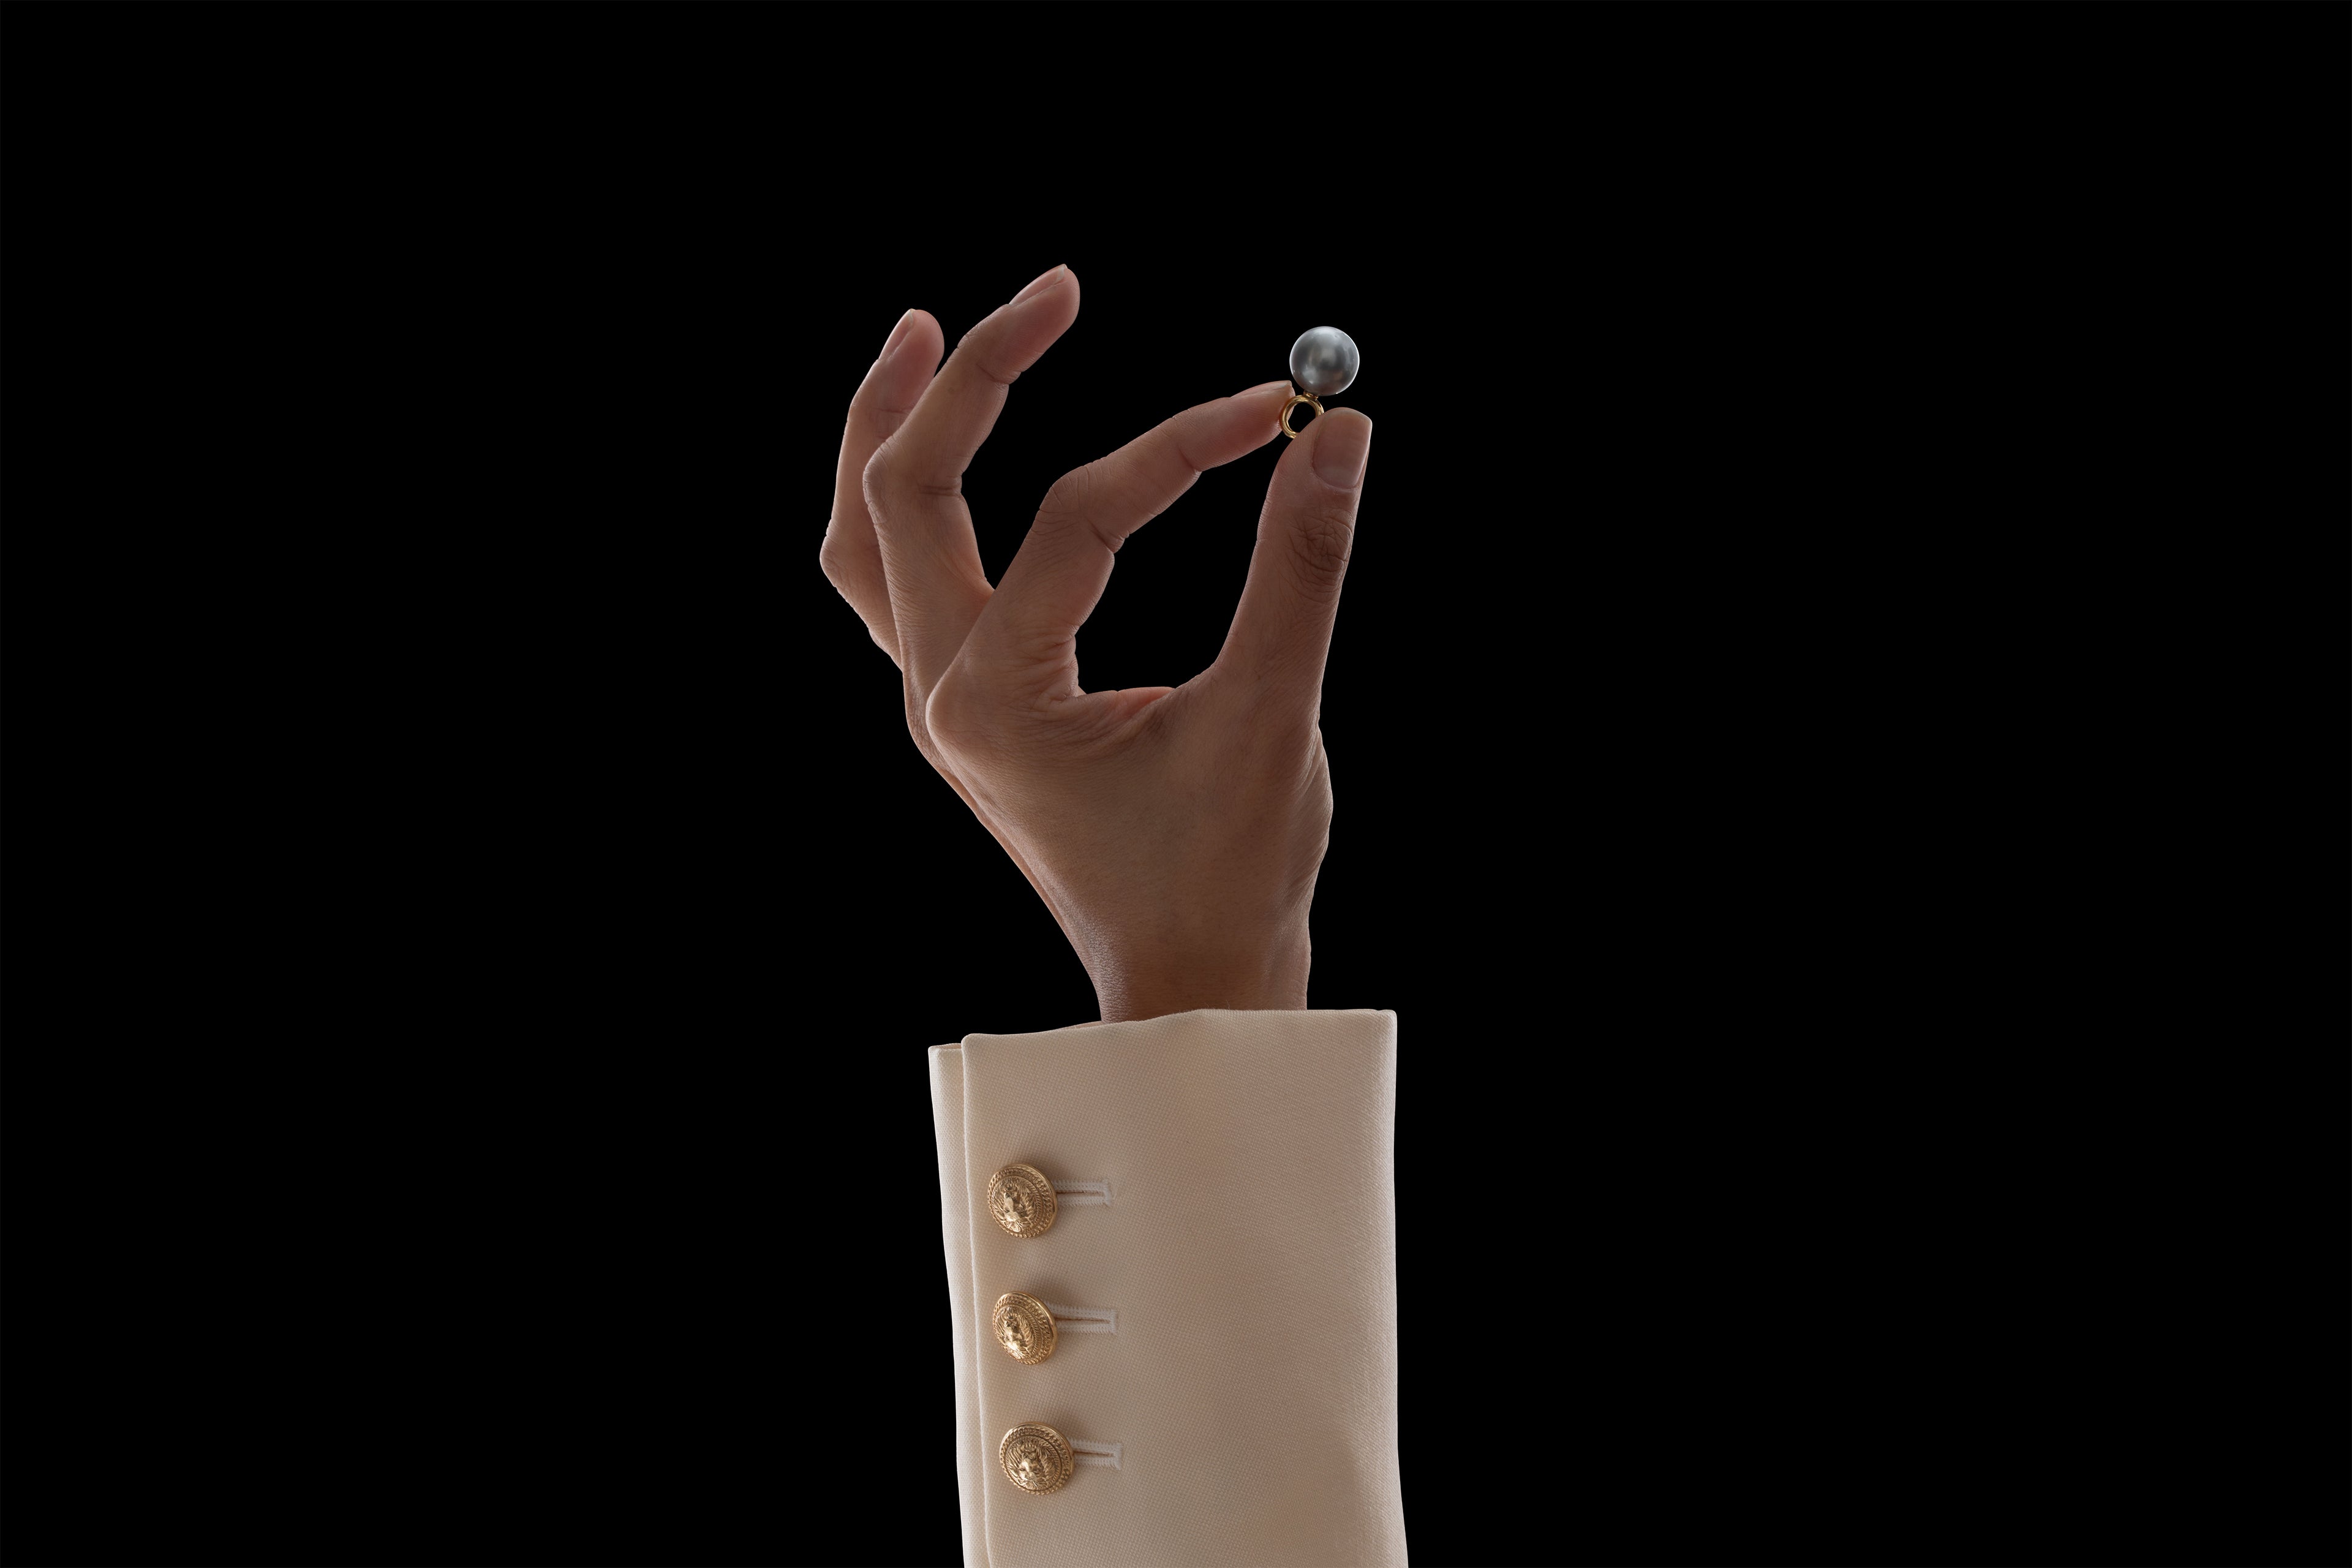 Ila's hand in a cream sleeve holding an ILA SODHANI Black Pearl Charm with a gold fitting in front of black background.